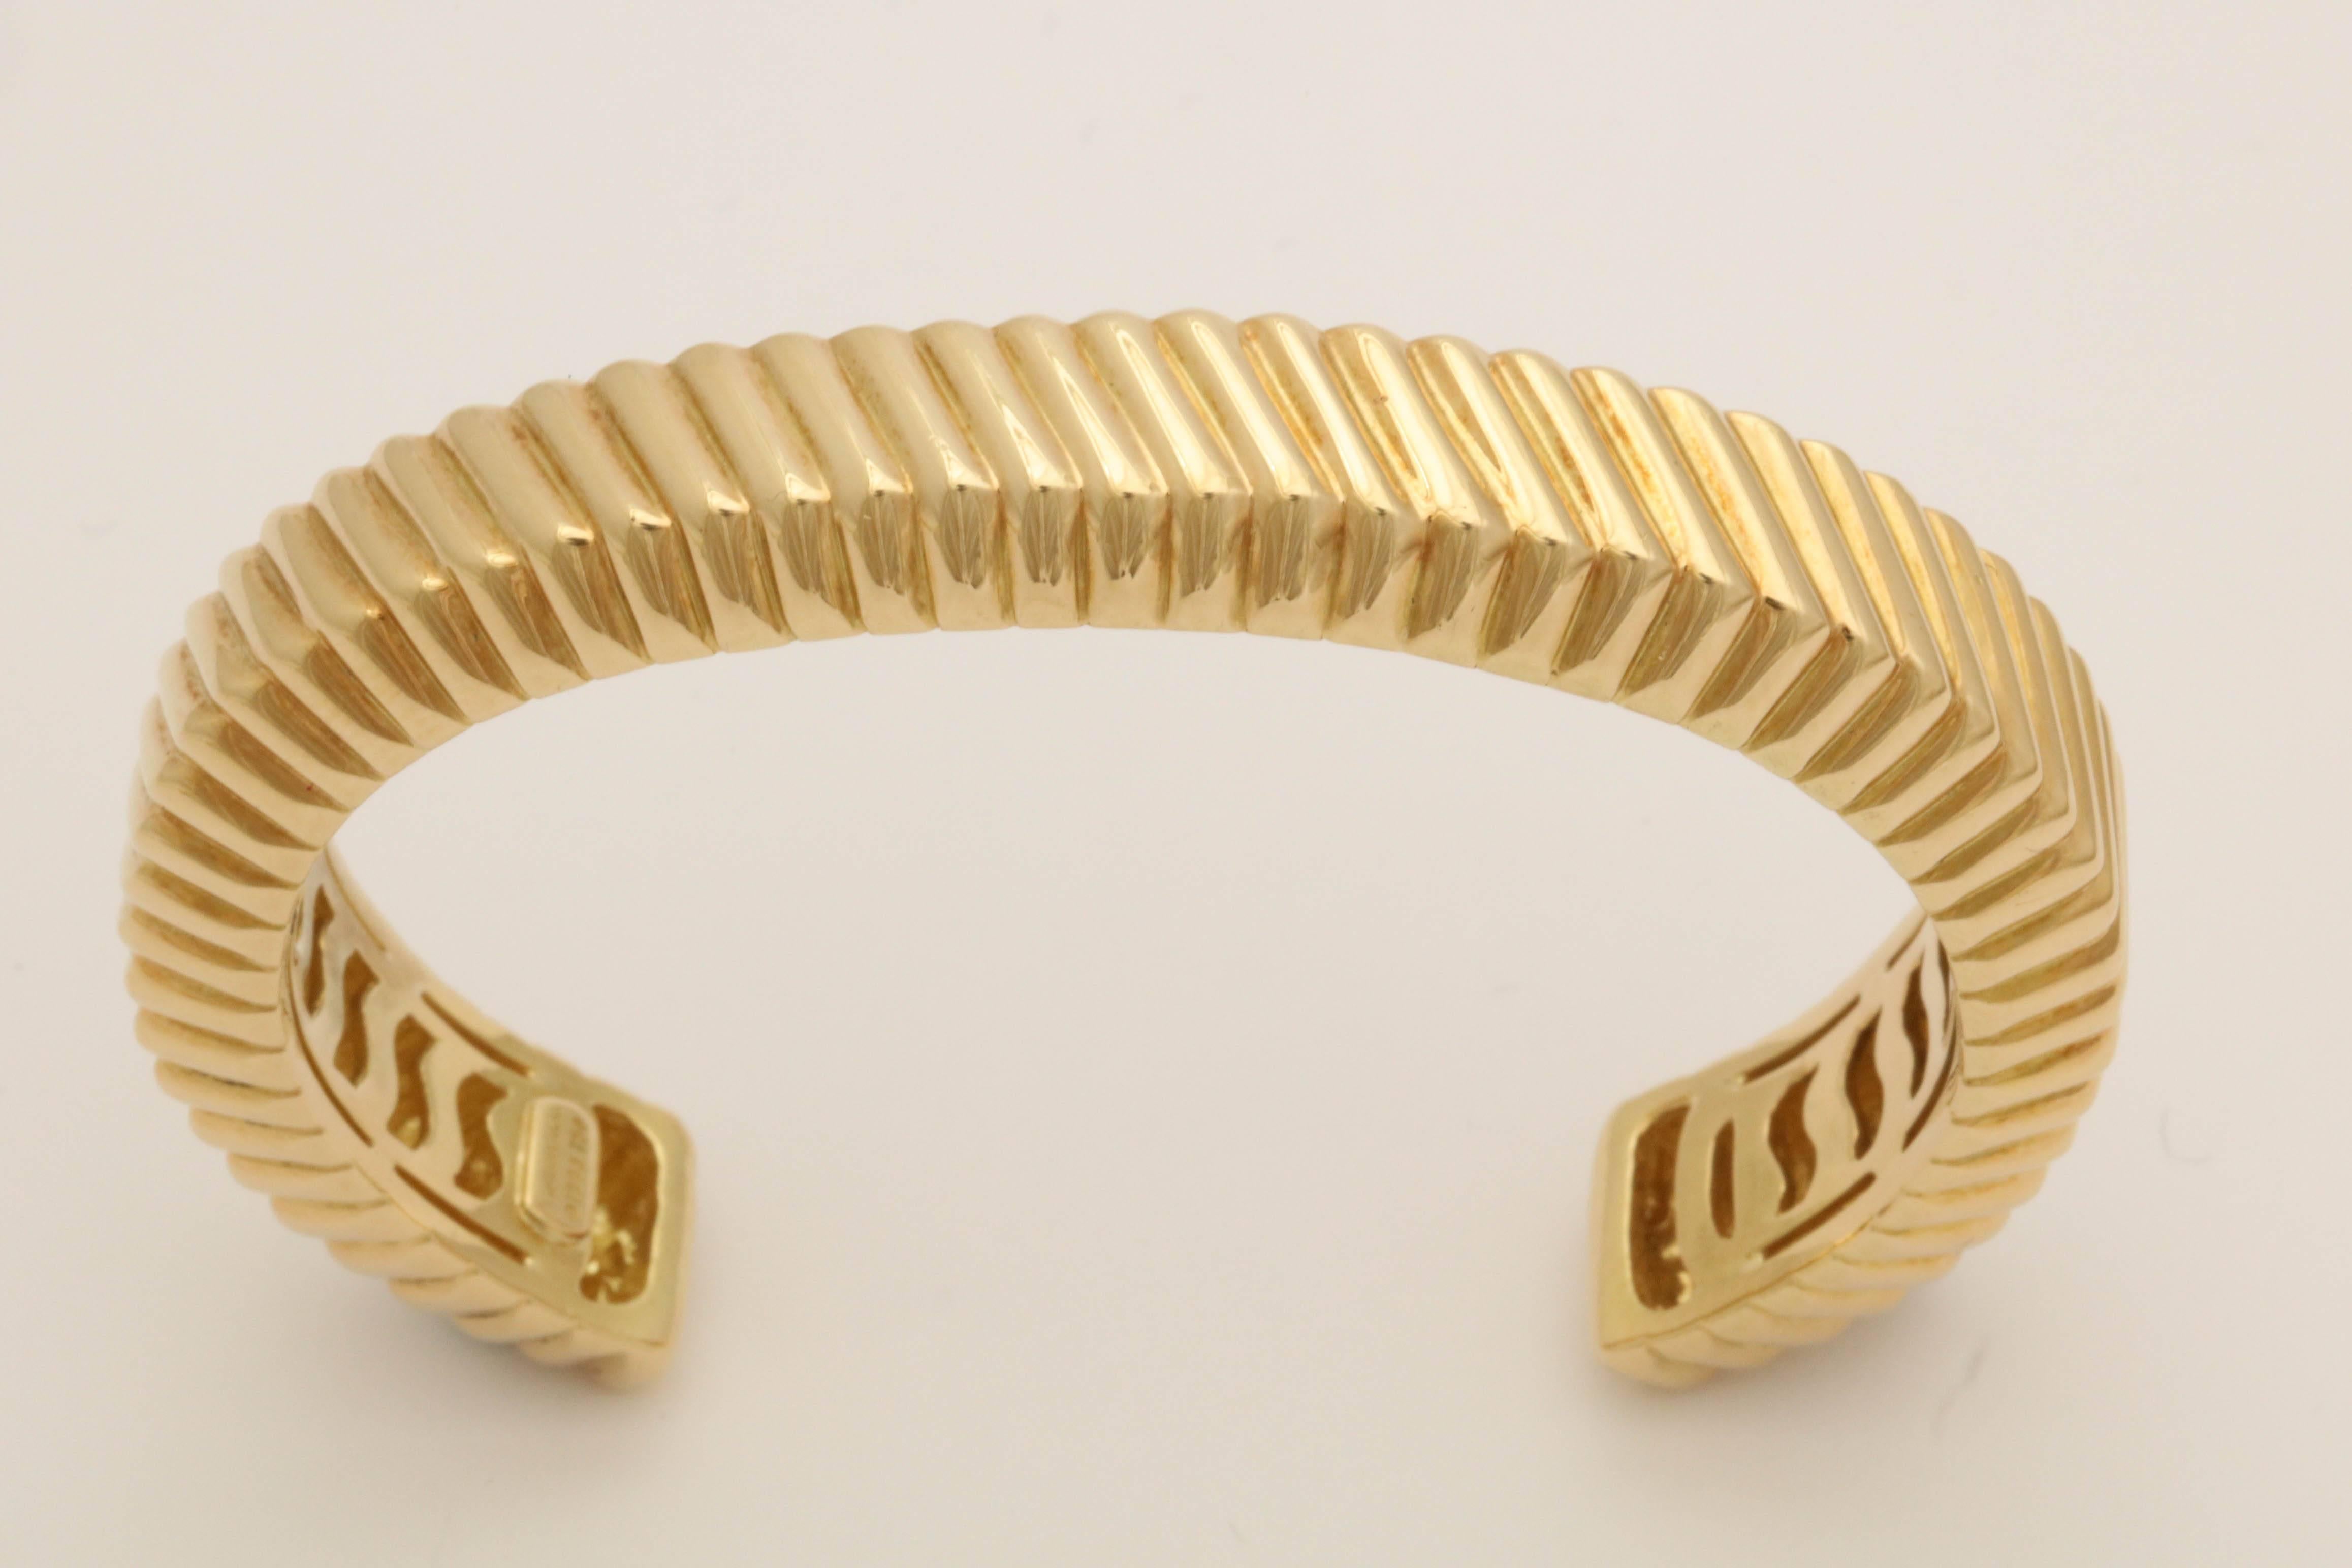 One Unisex Open Back Bangle Cuff bracelet Designed With Diagonal Ridges Textured Gold Workmanship. Beautifully Finished Off With An Openwork Design Dtail On The Inside Of The Bracelet. Created By Tiffany & Co. Dated 1998.Note; May Be Worn on The